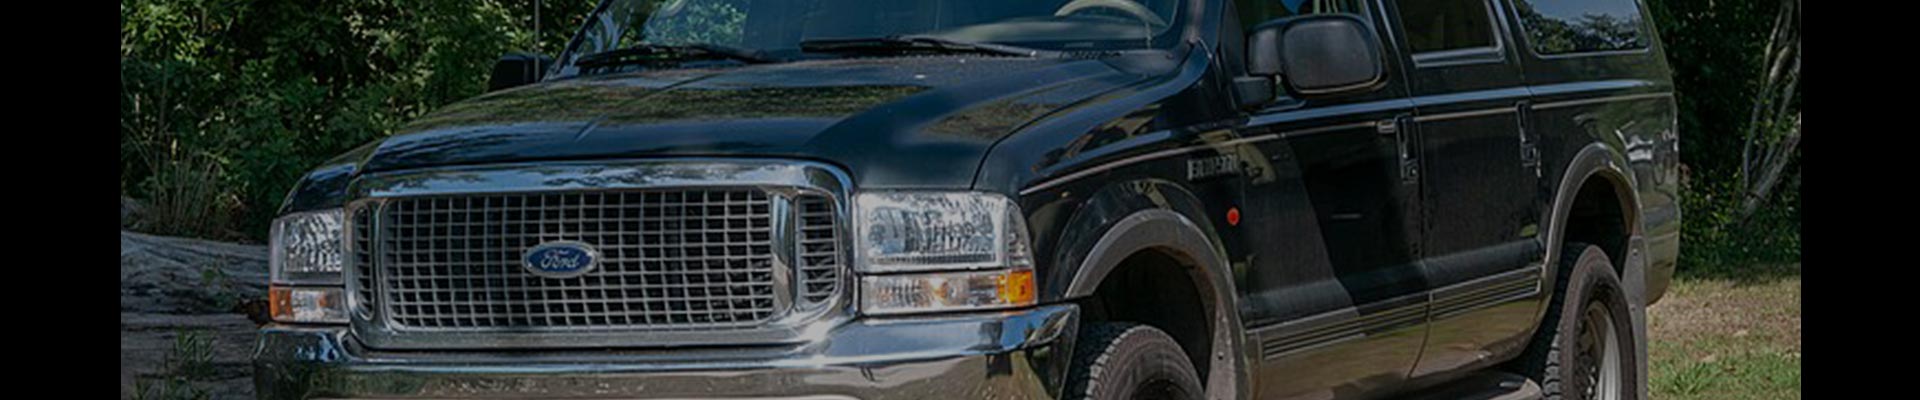 Parts for 2004 Ford Excursion